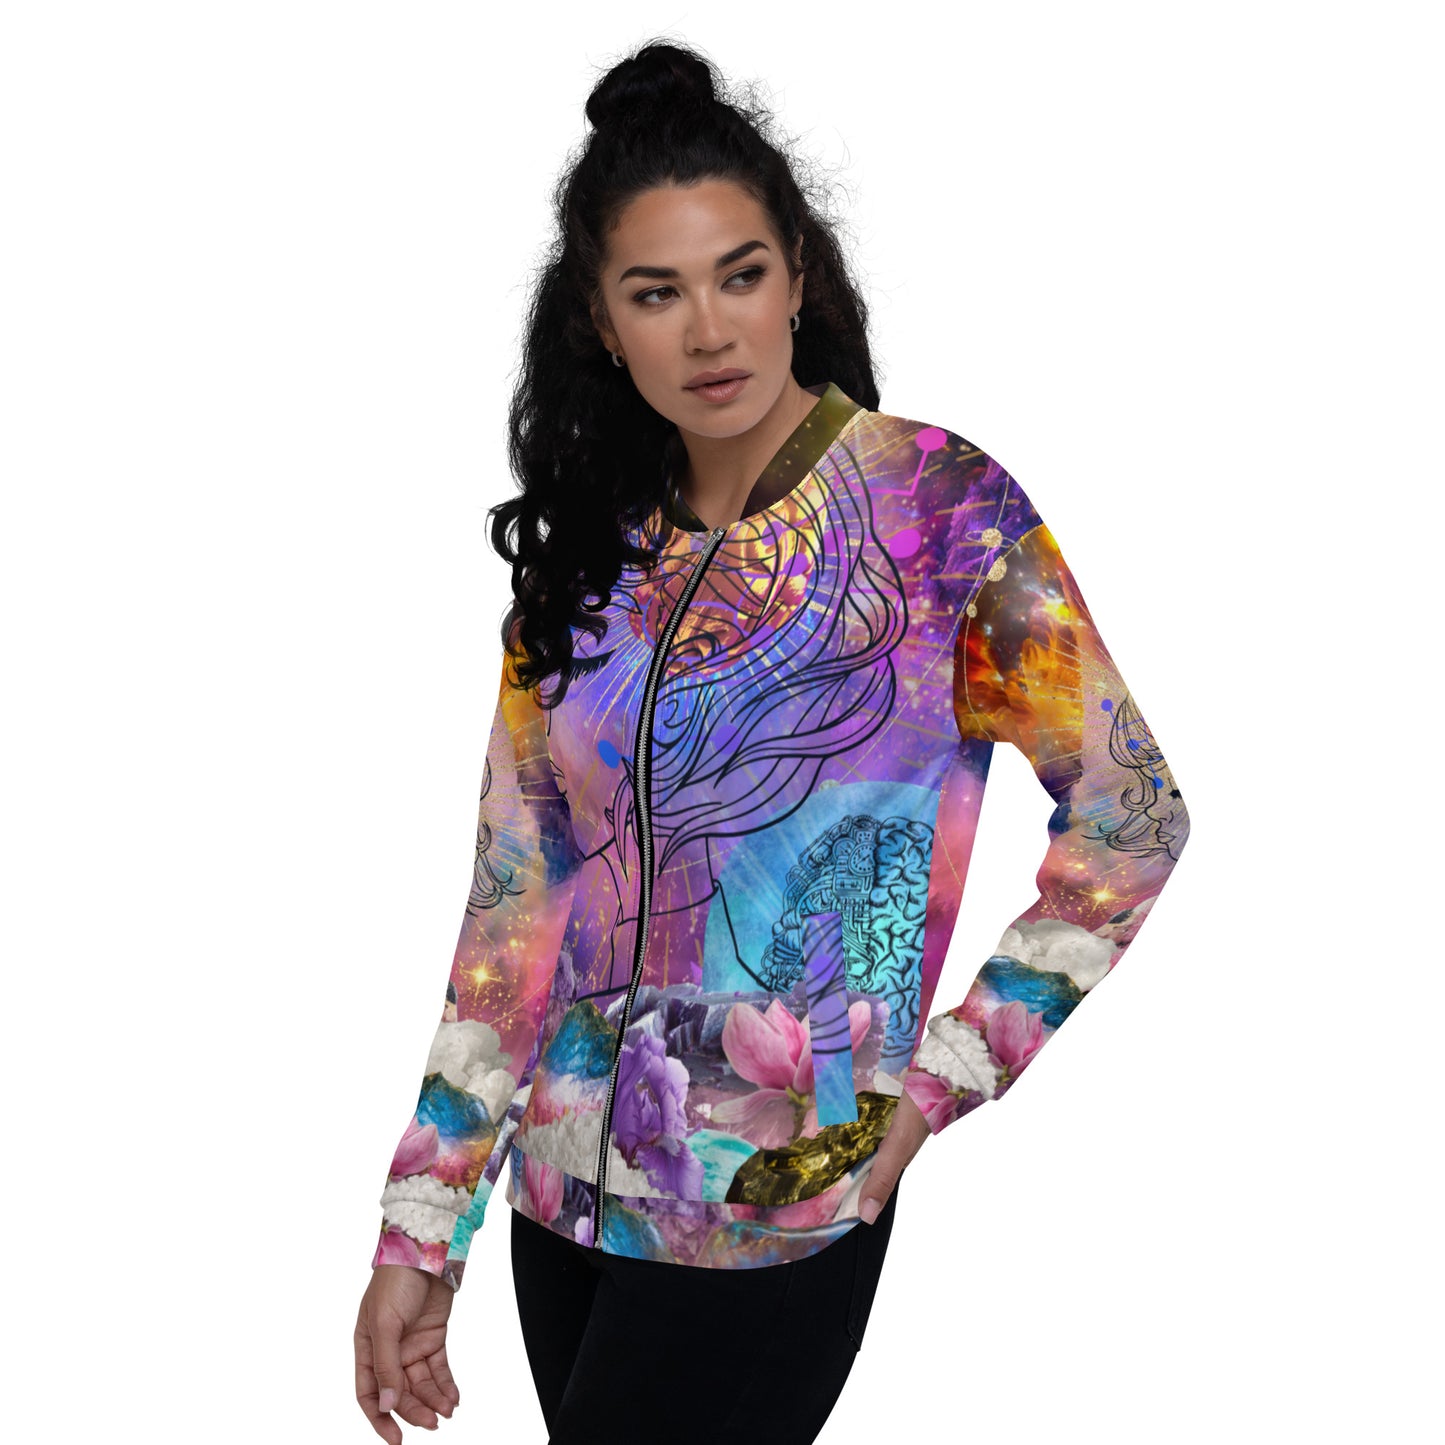 Galaxy Abstract Print Psychedelic Festival Clothing Rave Crystals Feminine Brain Female Empowerment All-over Print Unisex Bomber Jacket